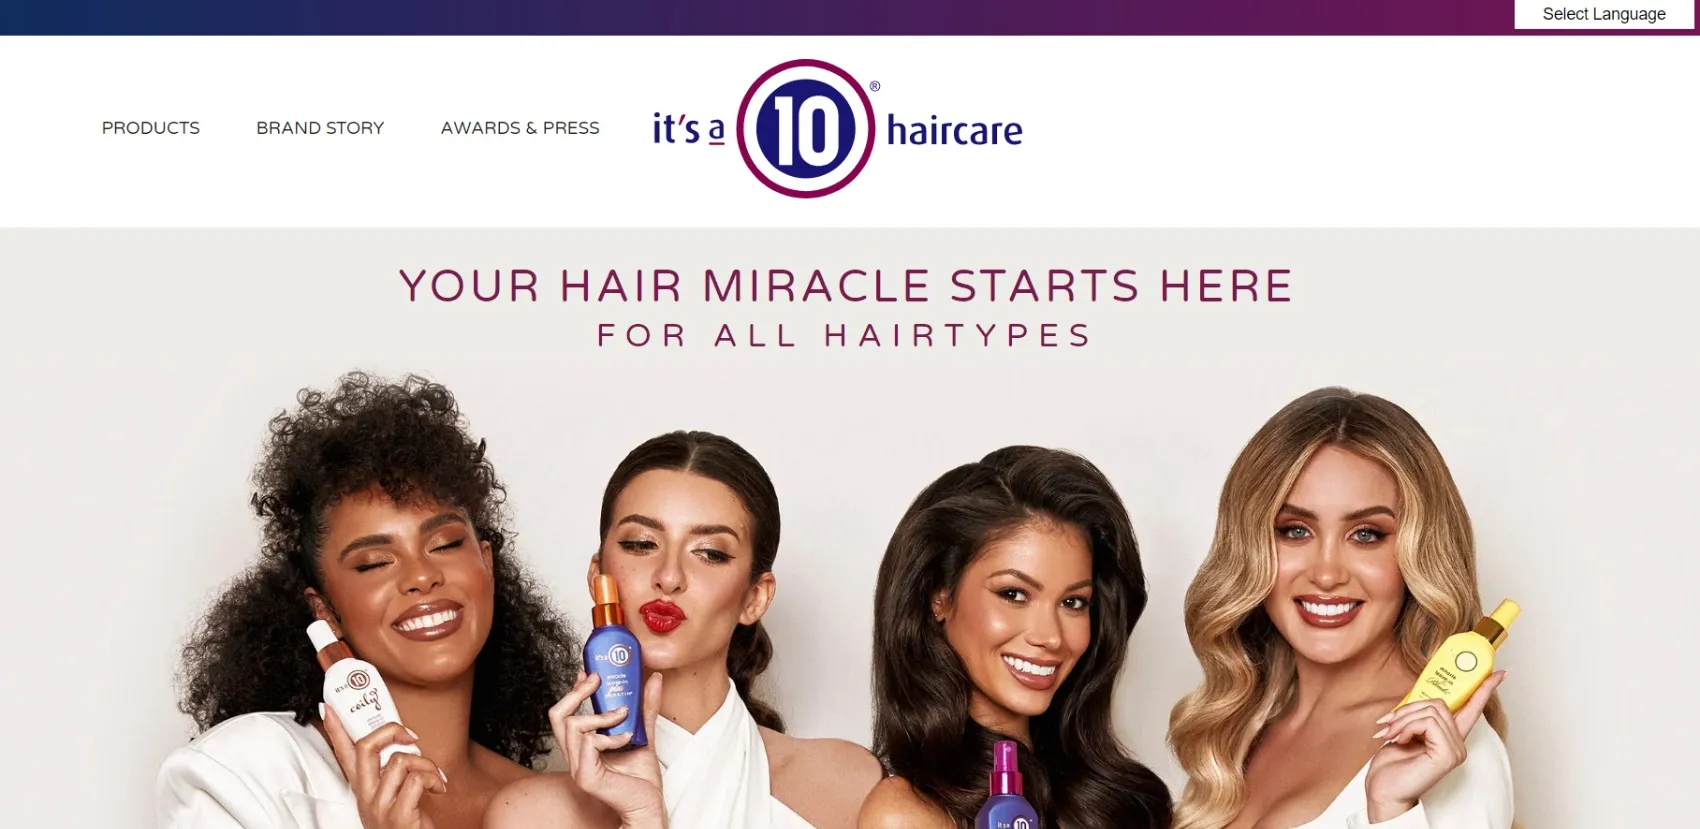 It’s A 10 Haircare